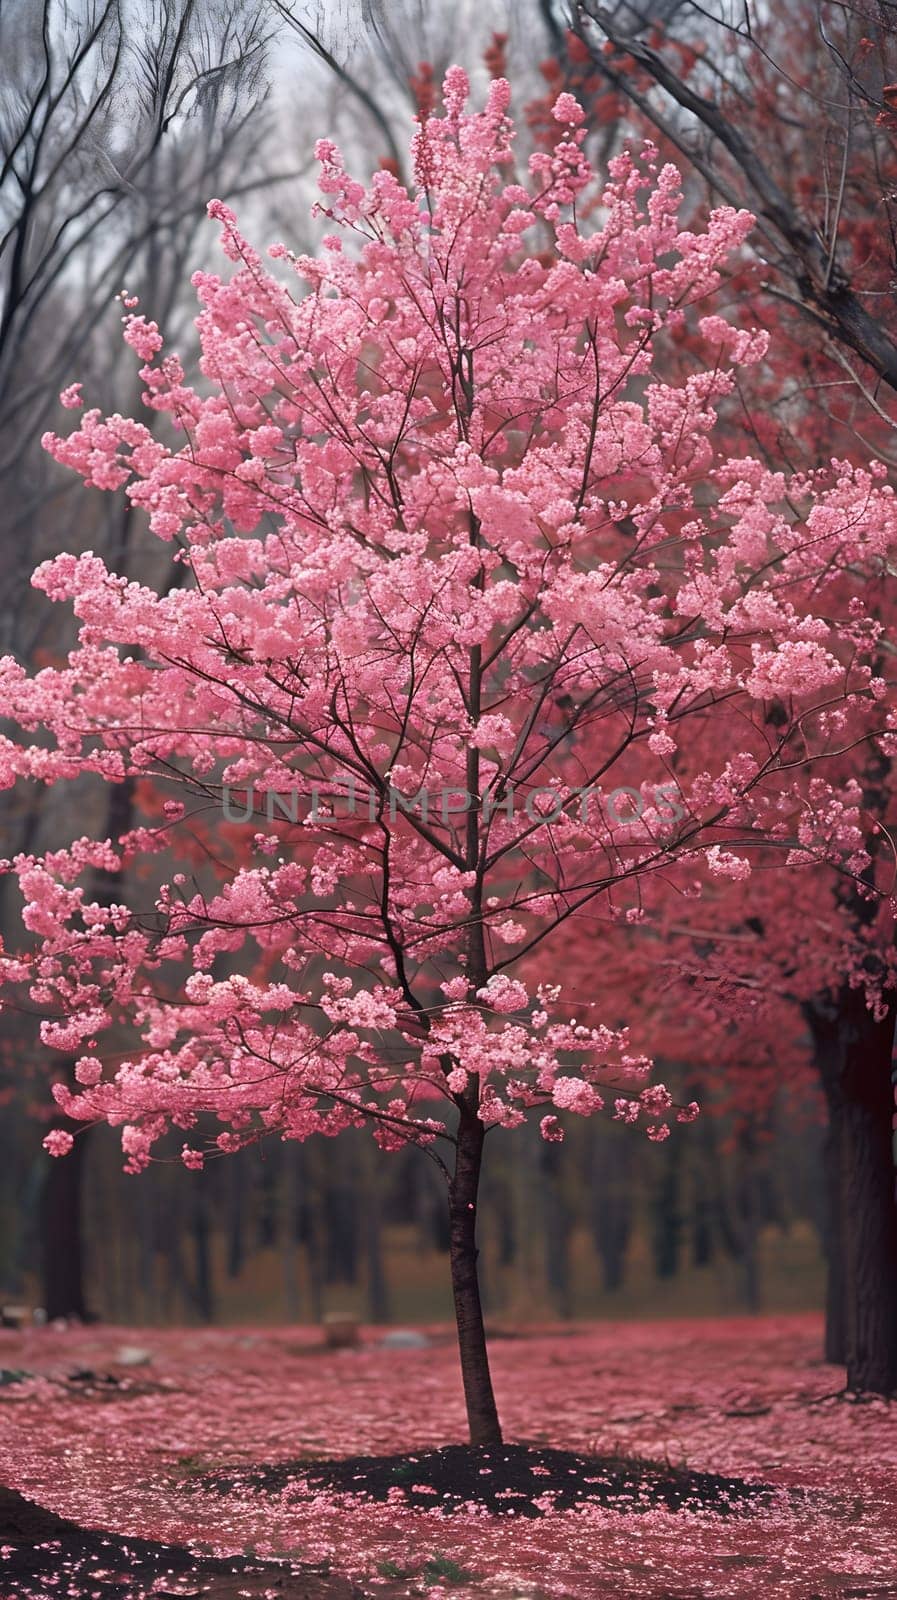 a cherry blossom tree with pink flowers in a park by Nadtochiy